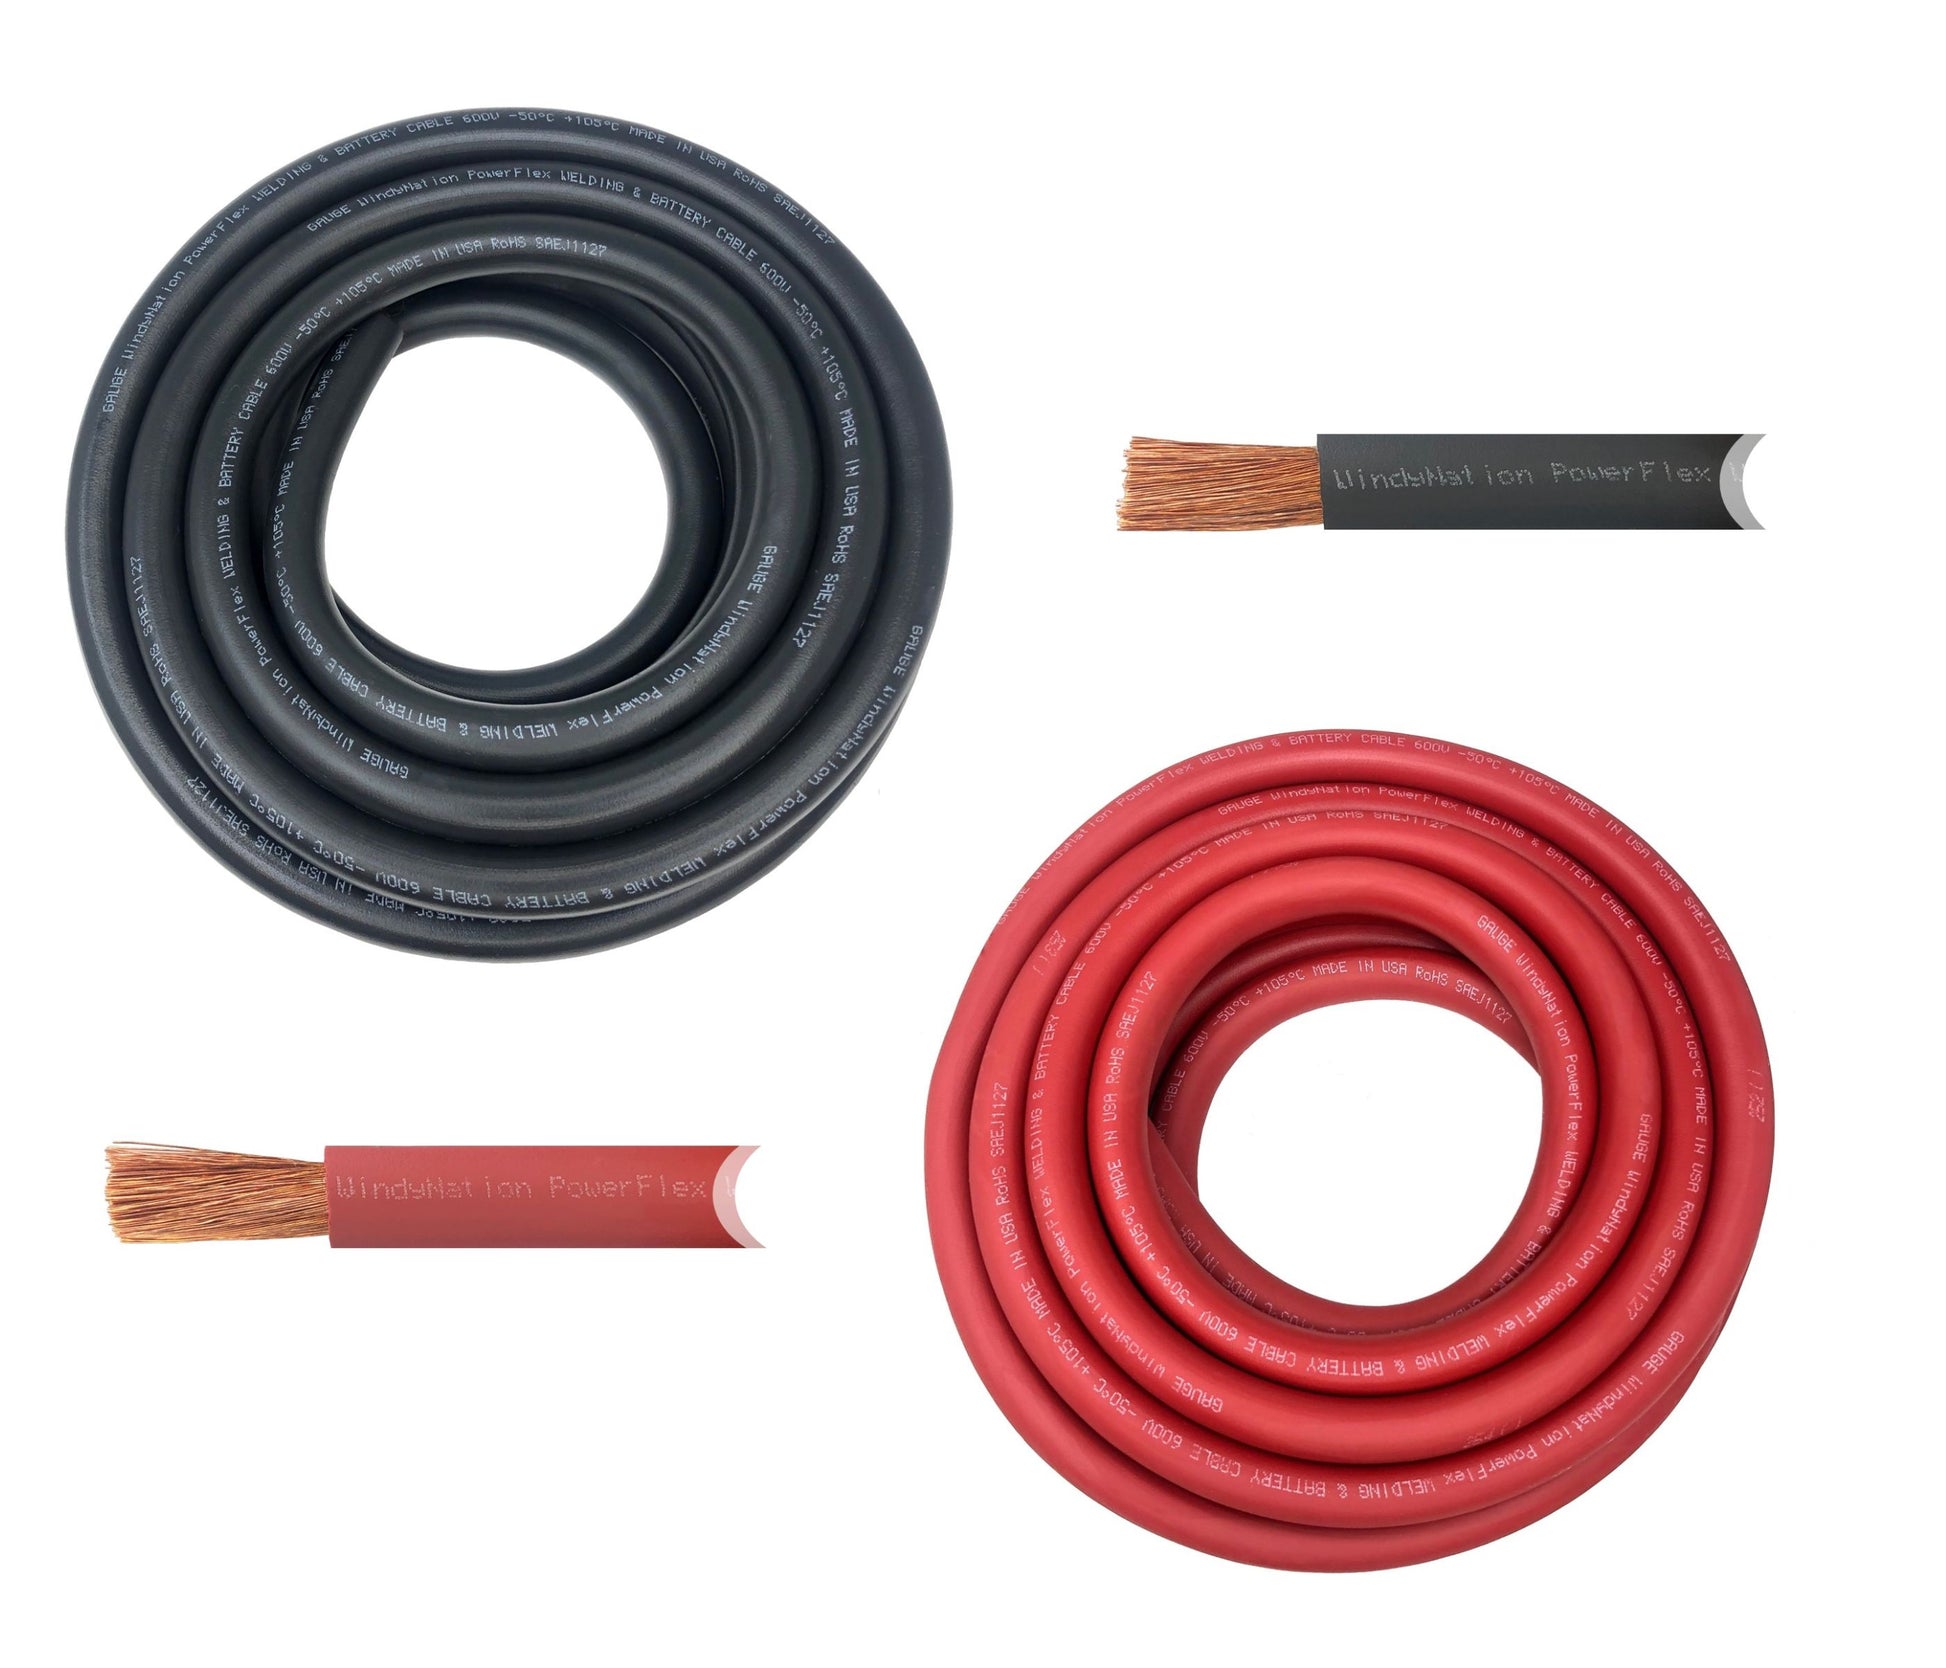 Best Connections 16 Gauge Wire Red & Black Power Ground 100 ft Each Primary Stranded Copper Clad